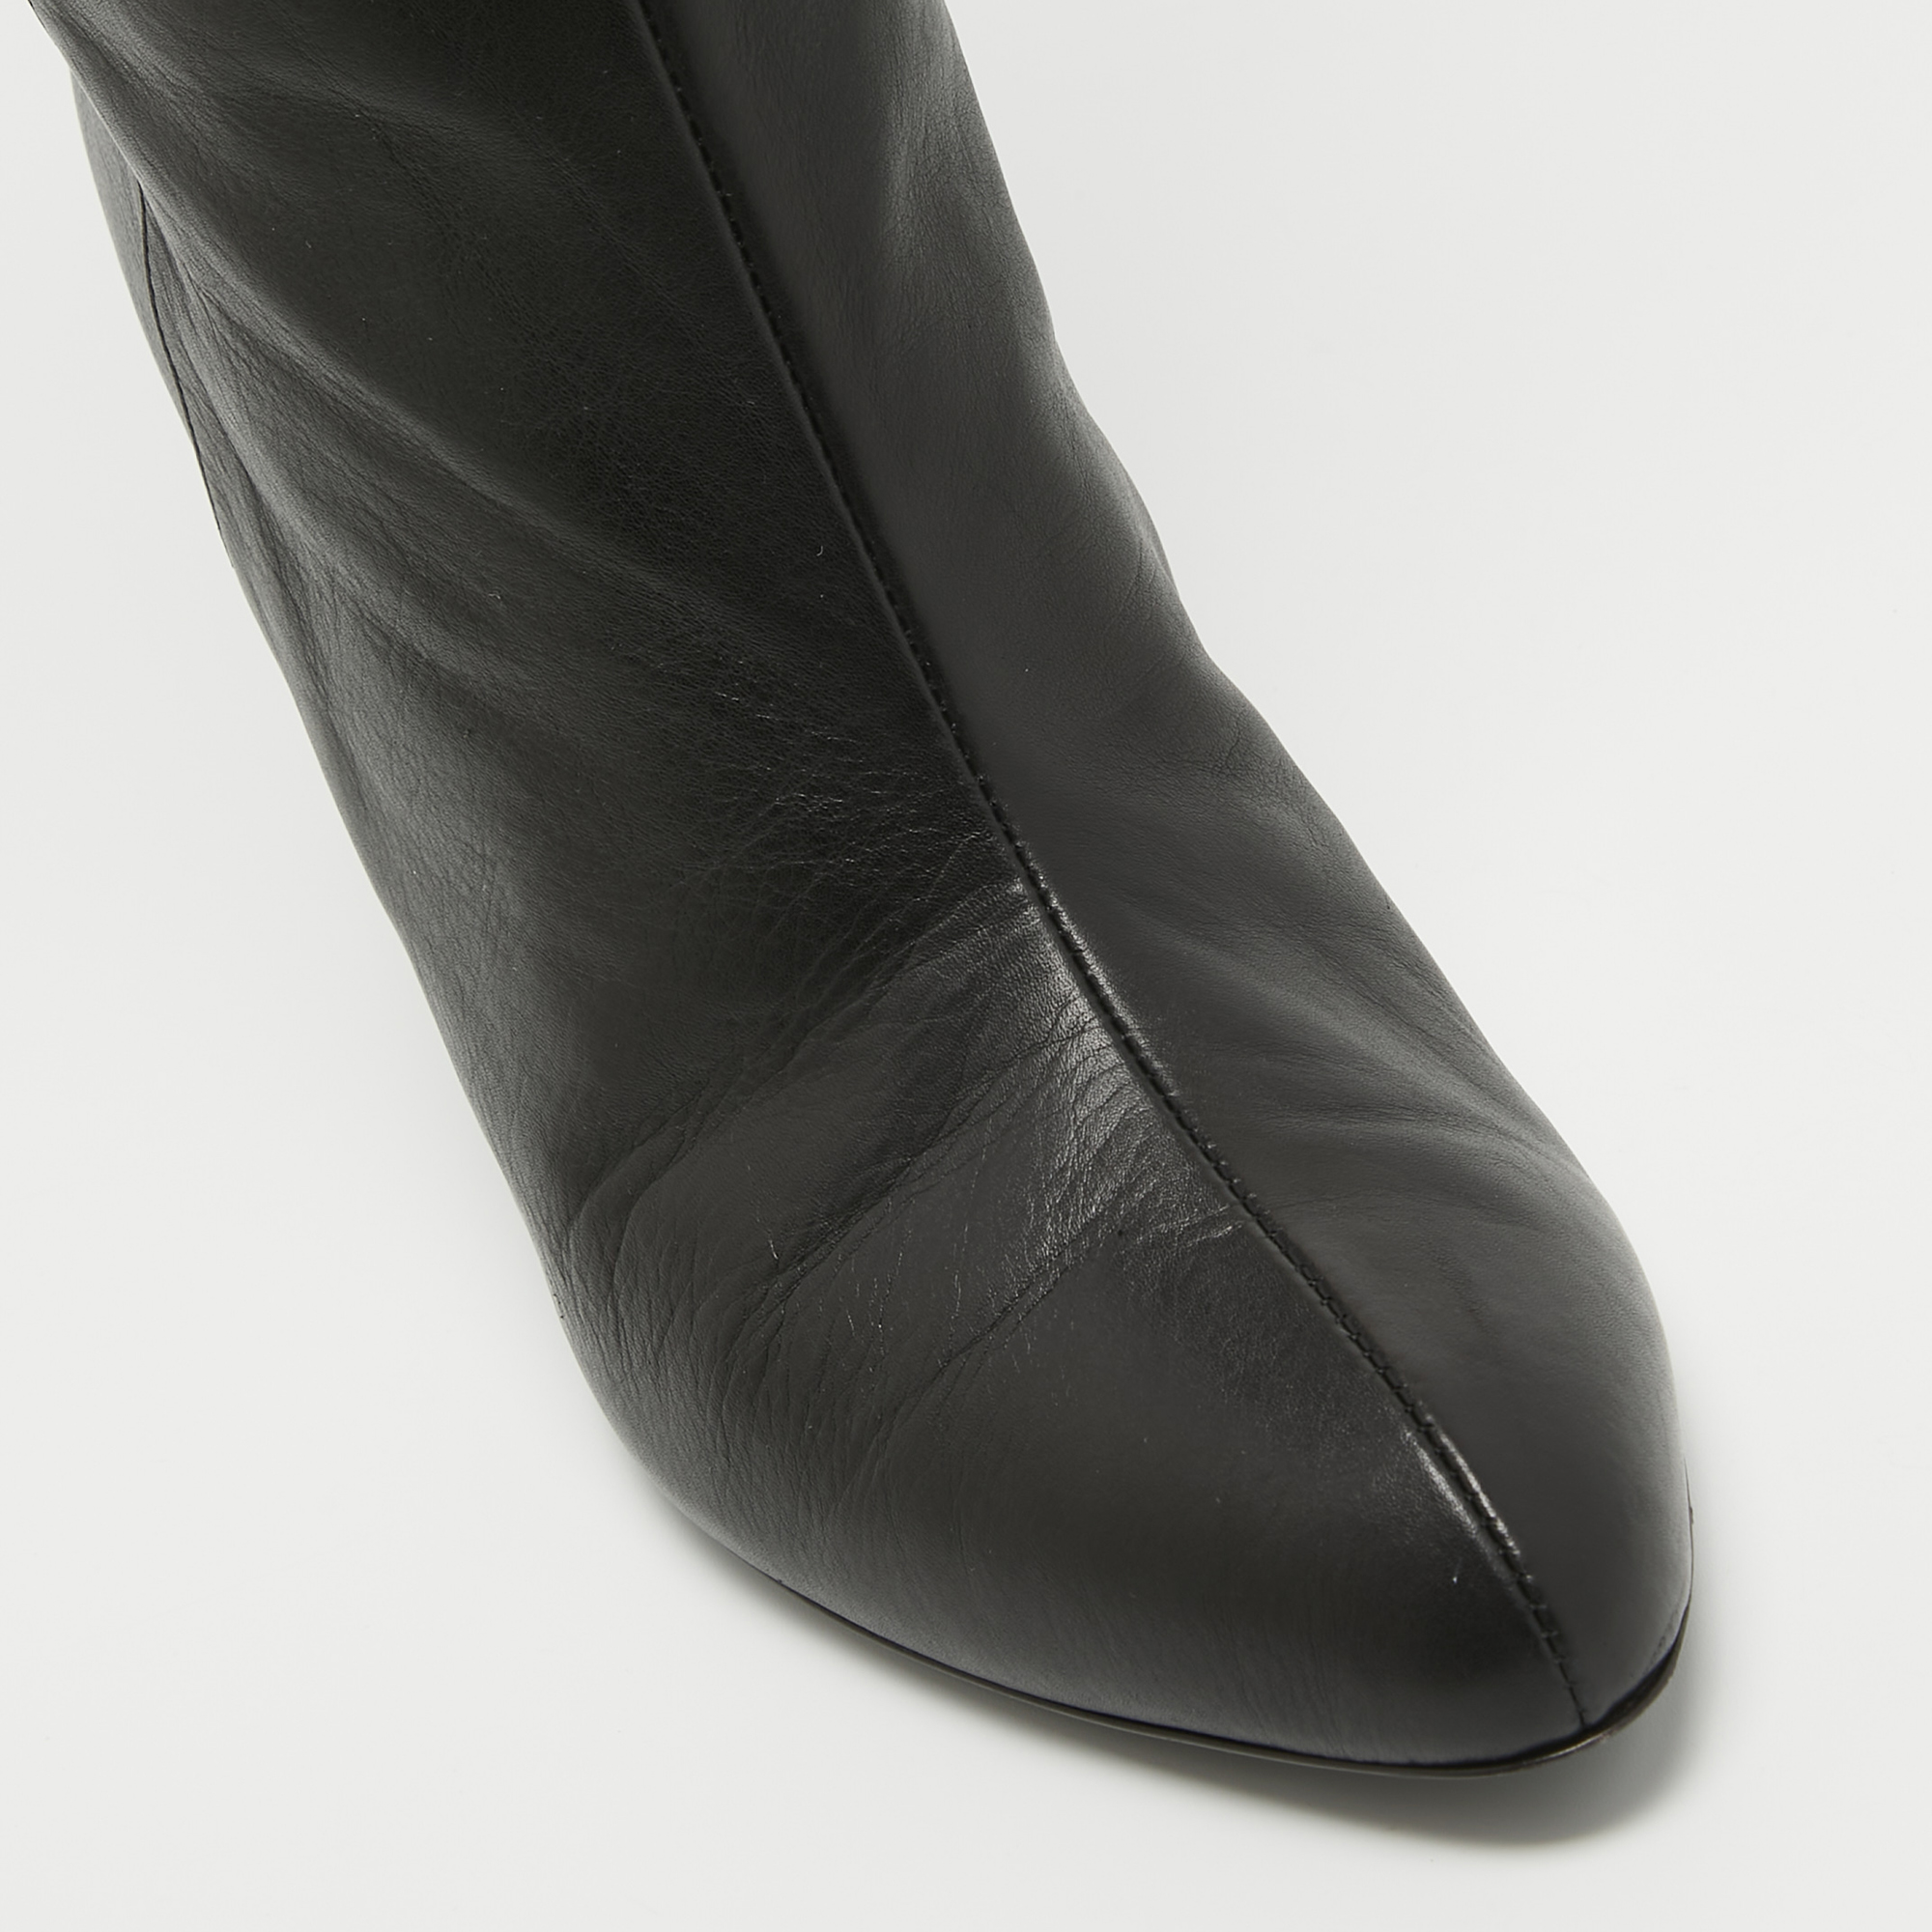 Gucci Black Leather Knee Length Boots Size 40